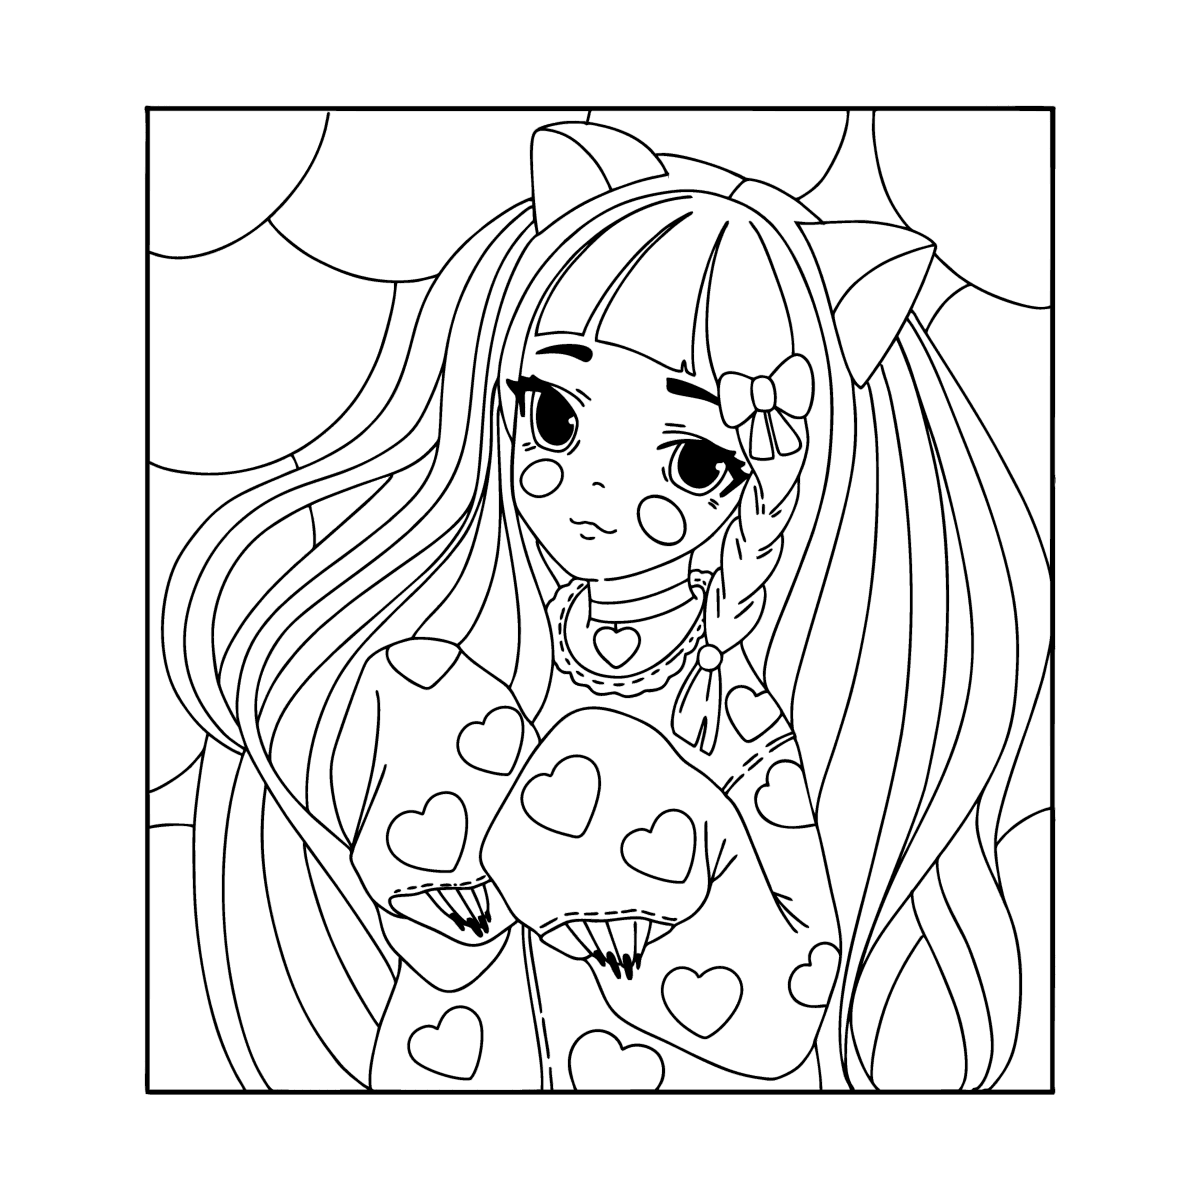 Cute Girl Holding Ice Cream in Her Hand and Smiling Anime Coloring Page  for Teenagers Stock Vector  Illustration of beautiful wildlife 273249124